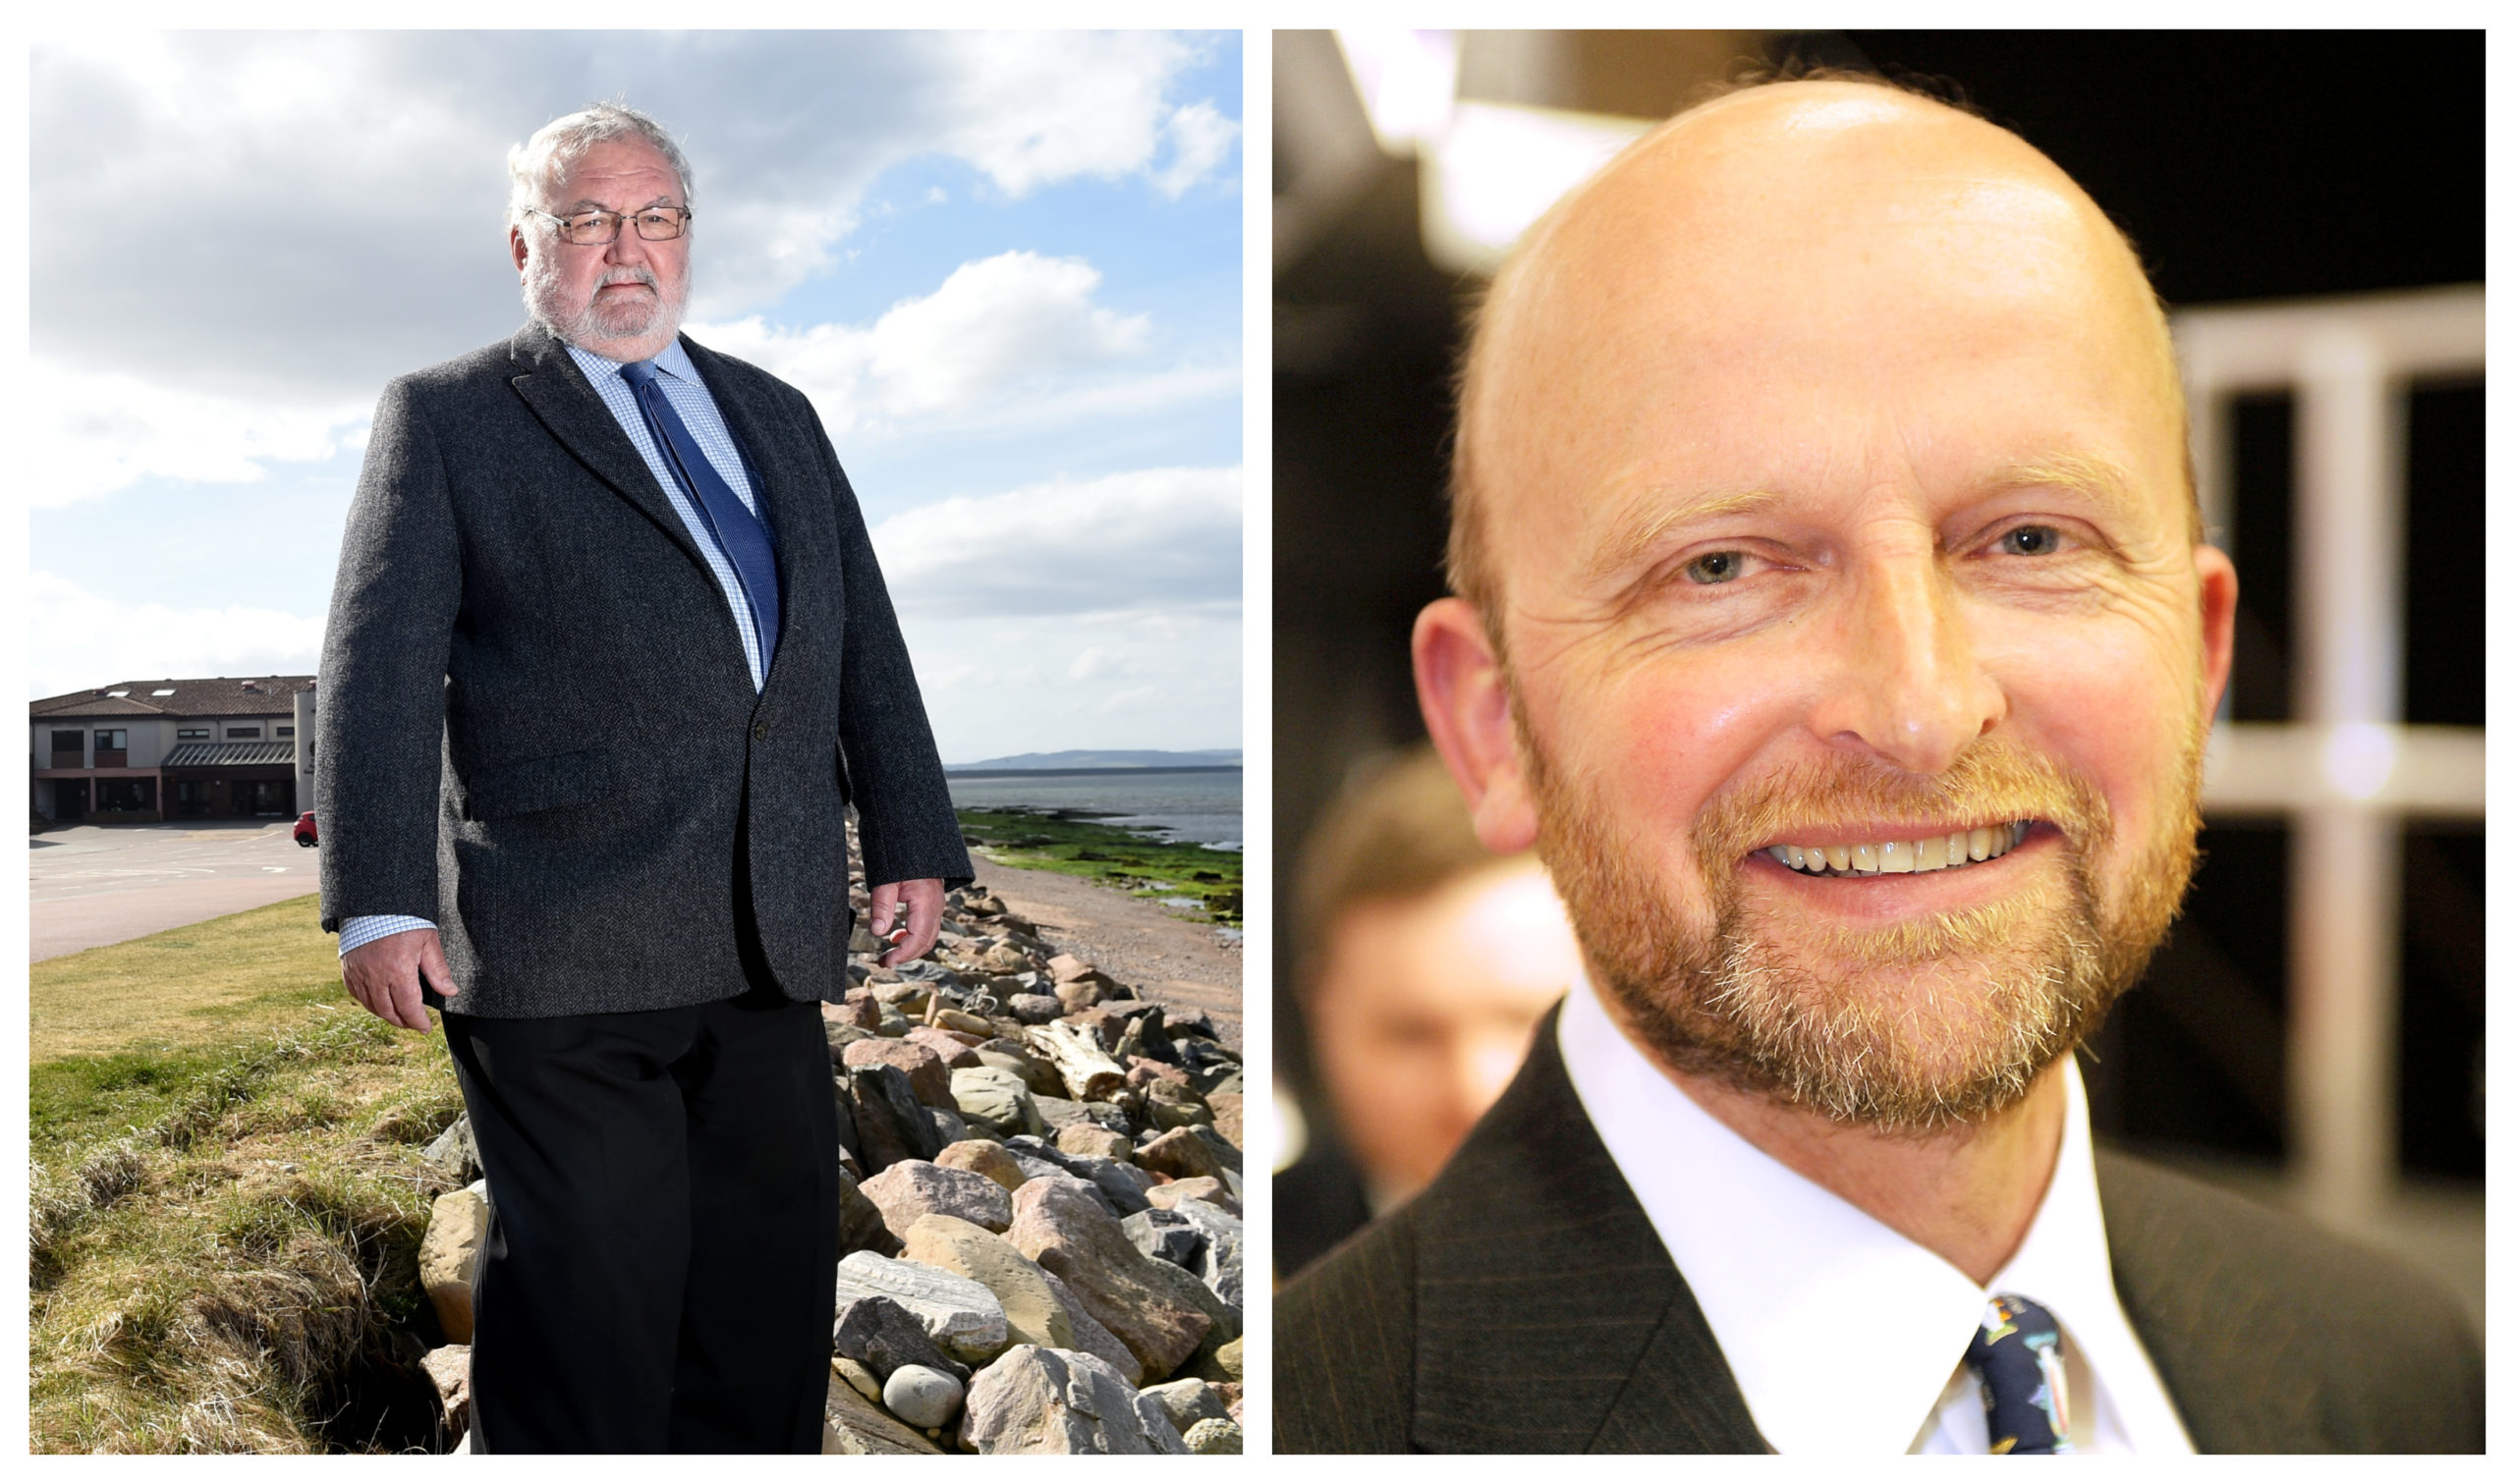 Councillors Tom Heggie and Matthew Reiss have praised a resurgence in community spirit